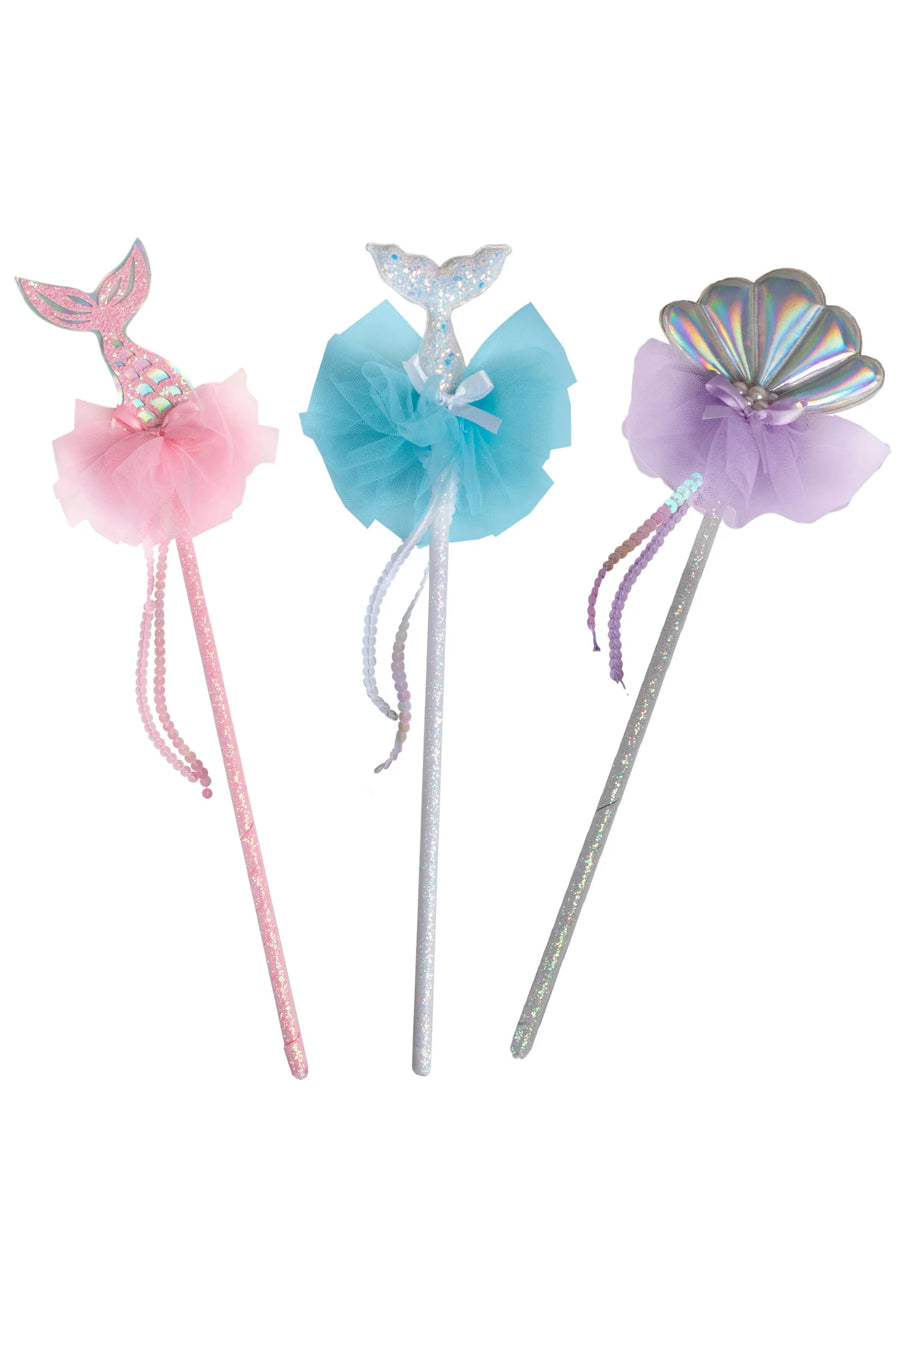  left to right; Pink mermaid tail wand, blue mermaid tail wand, and purple seashell wand pictured from the front